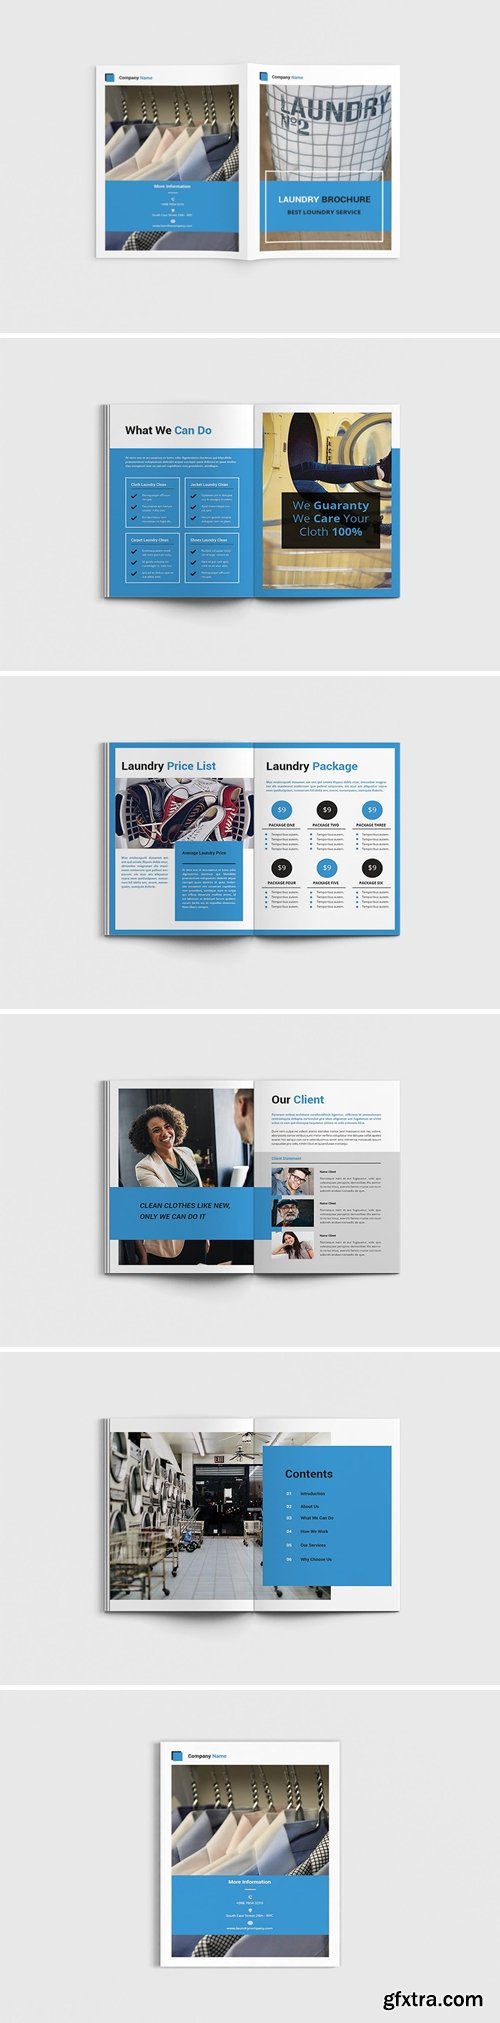 Cleany - A4 Laundry Brochure Template